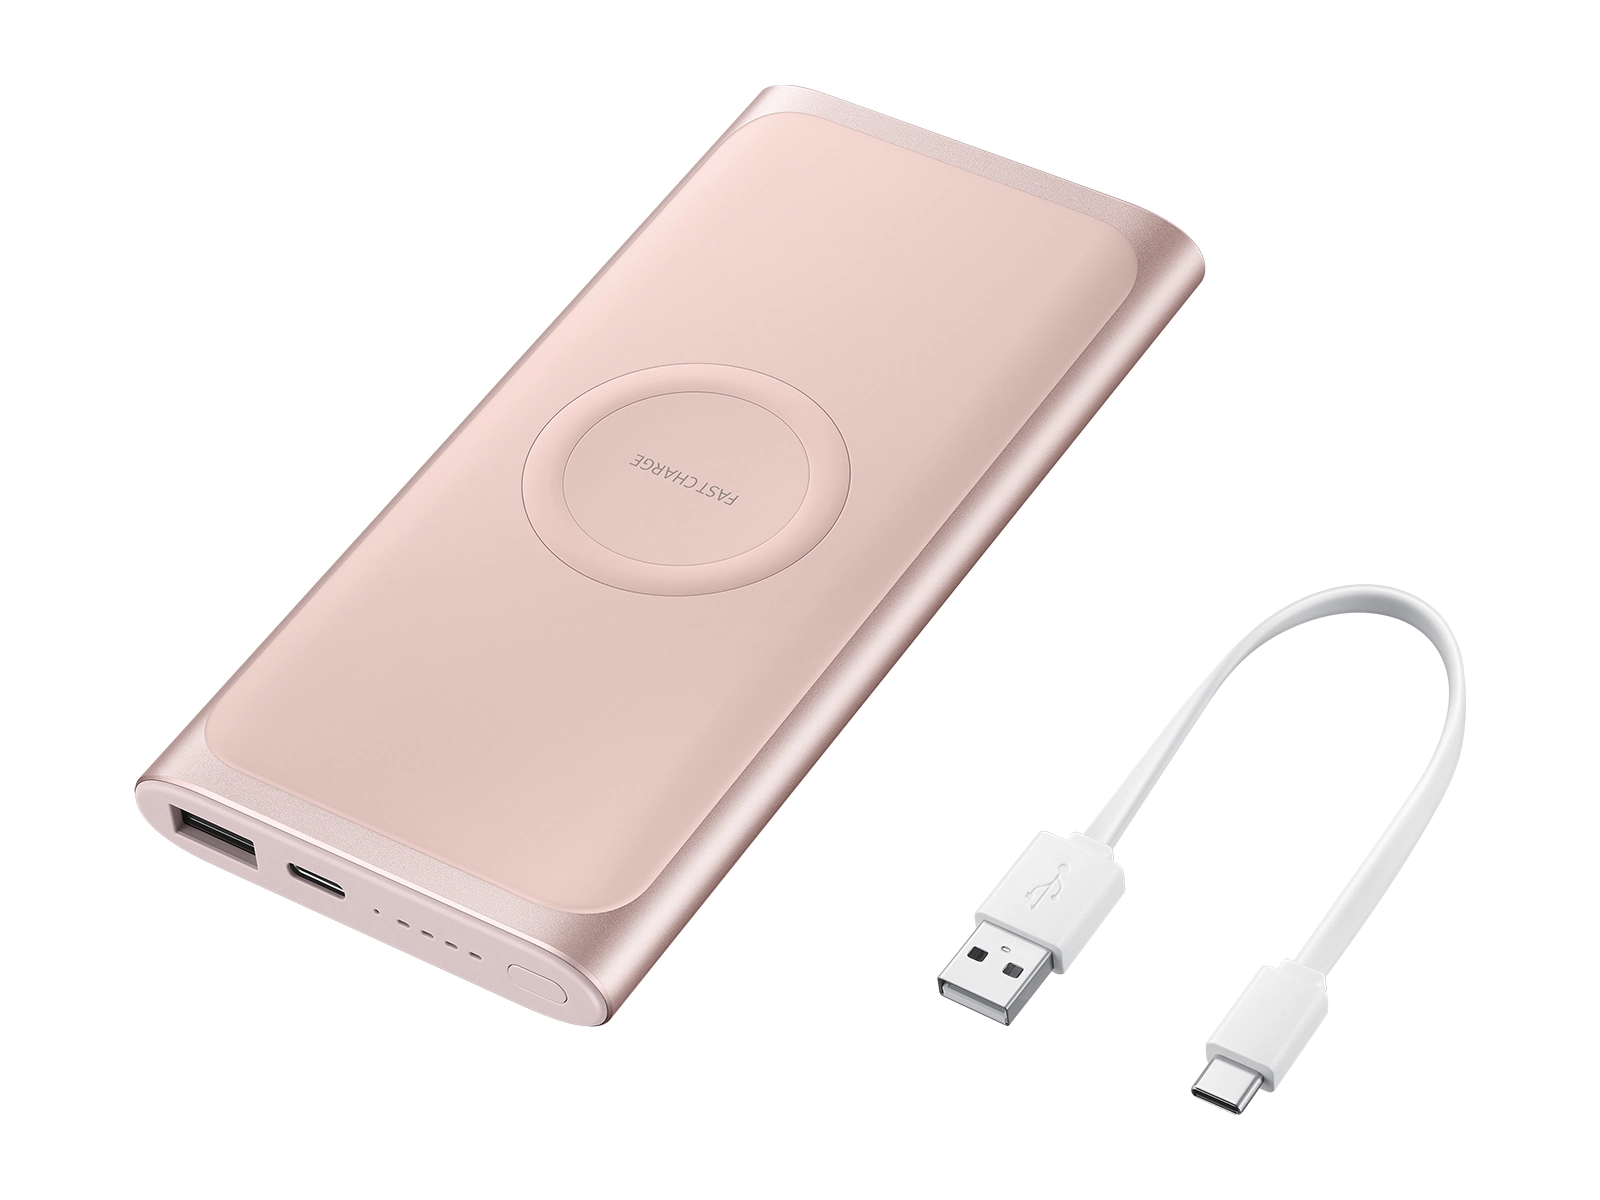 Samsung Wireless Charger Portable Battery 10,000 mAh, Pink